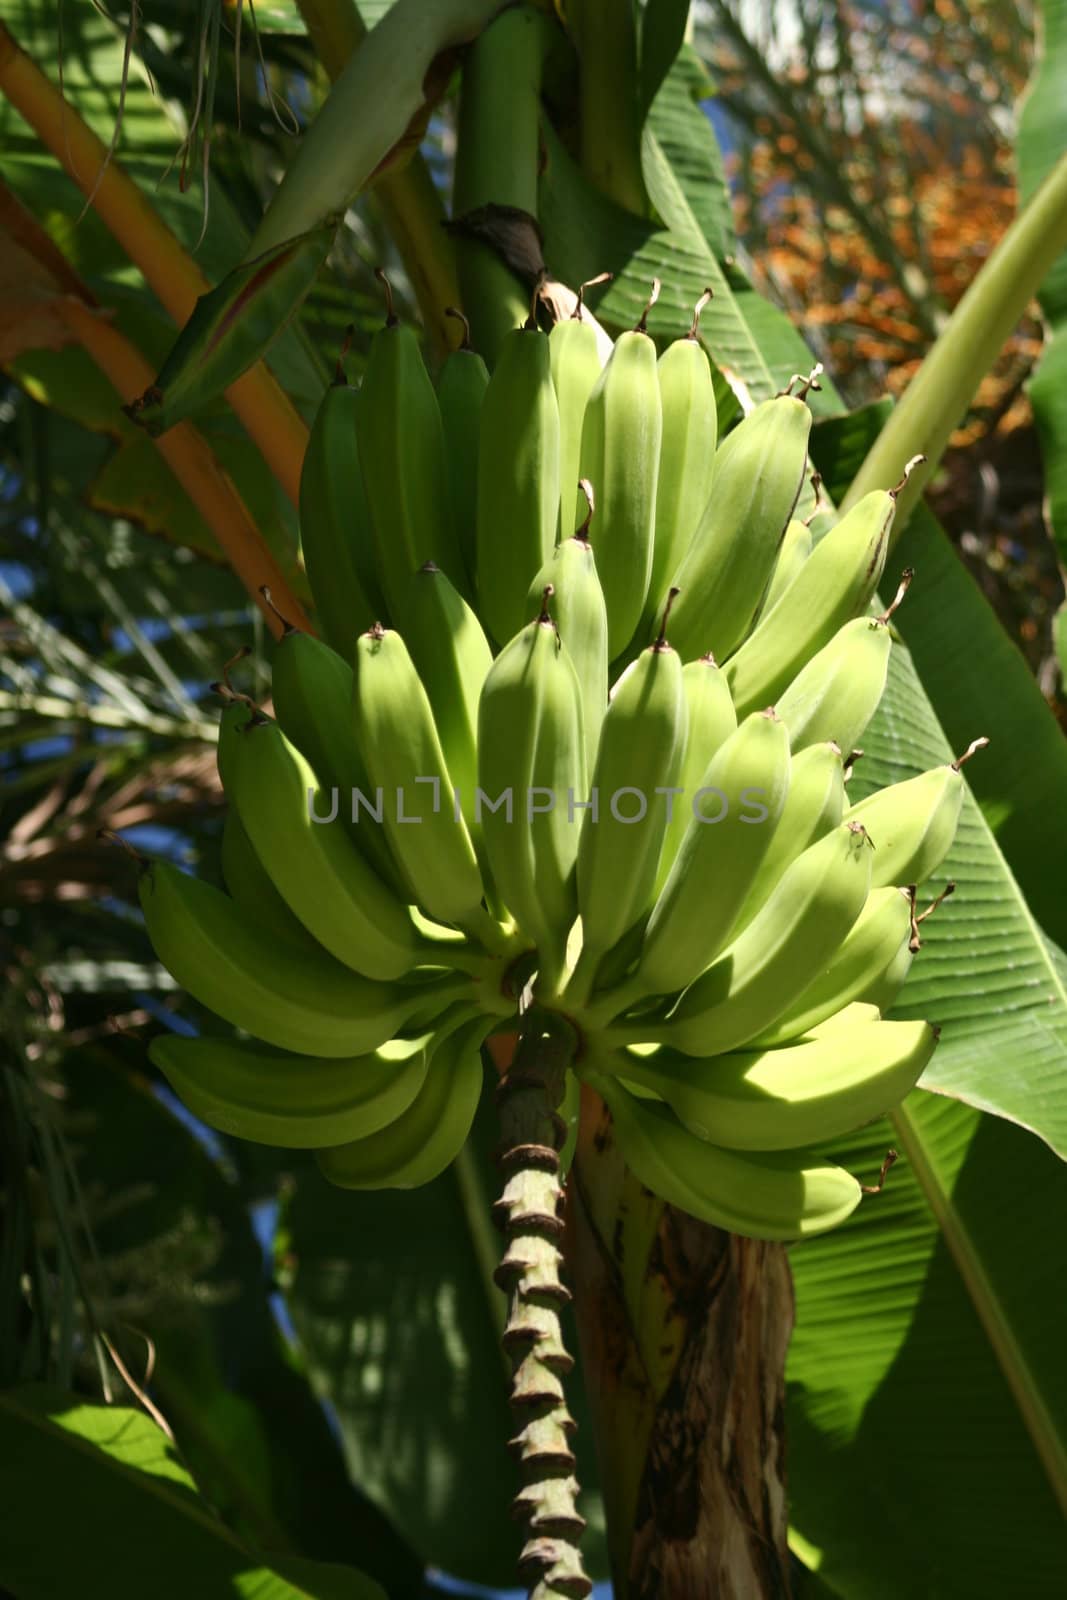 Detail of bananas on the tree